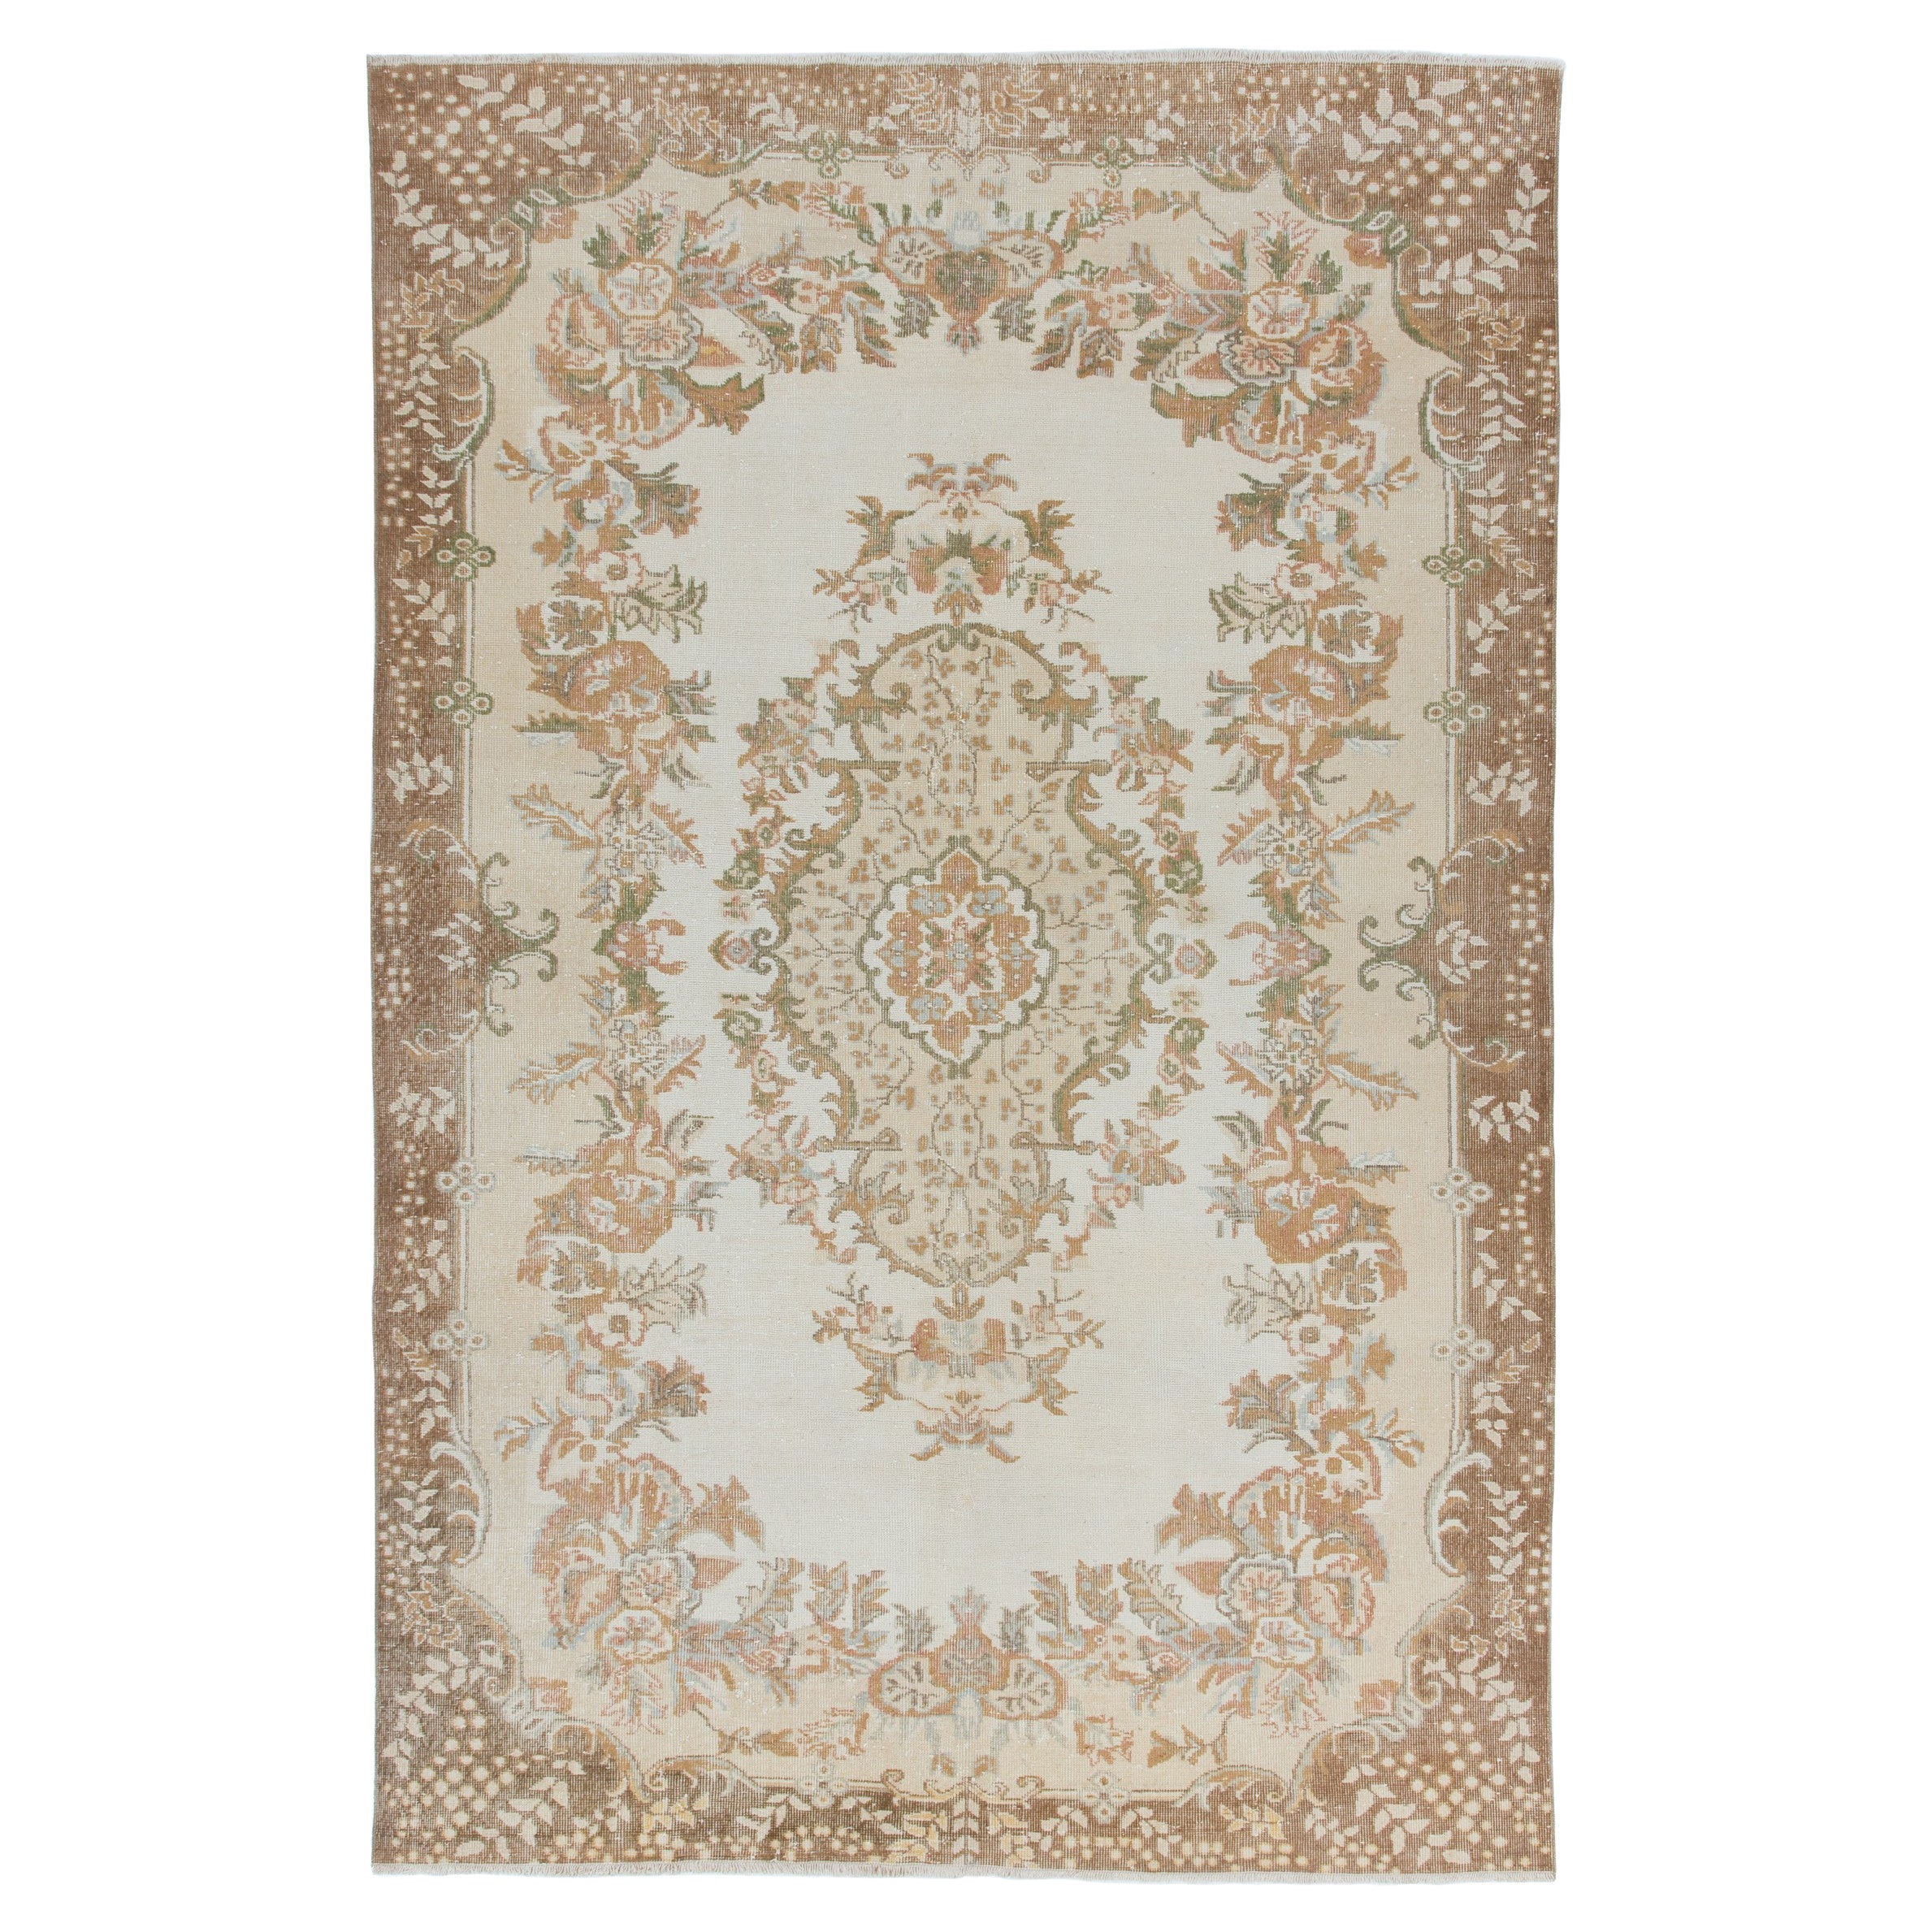 7x11 Ft Authentic Hand-Knotted Vintage Turkish Area Rug in Soft Colors